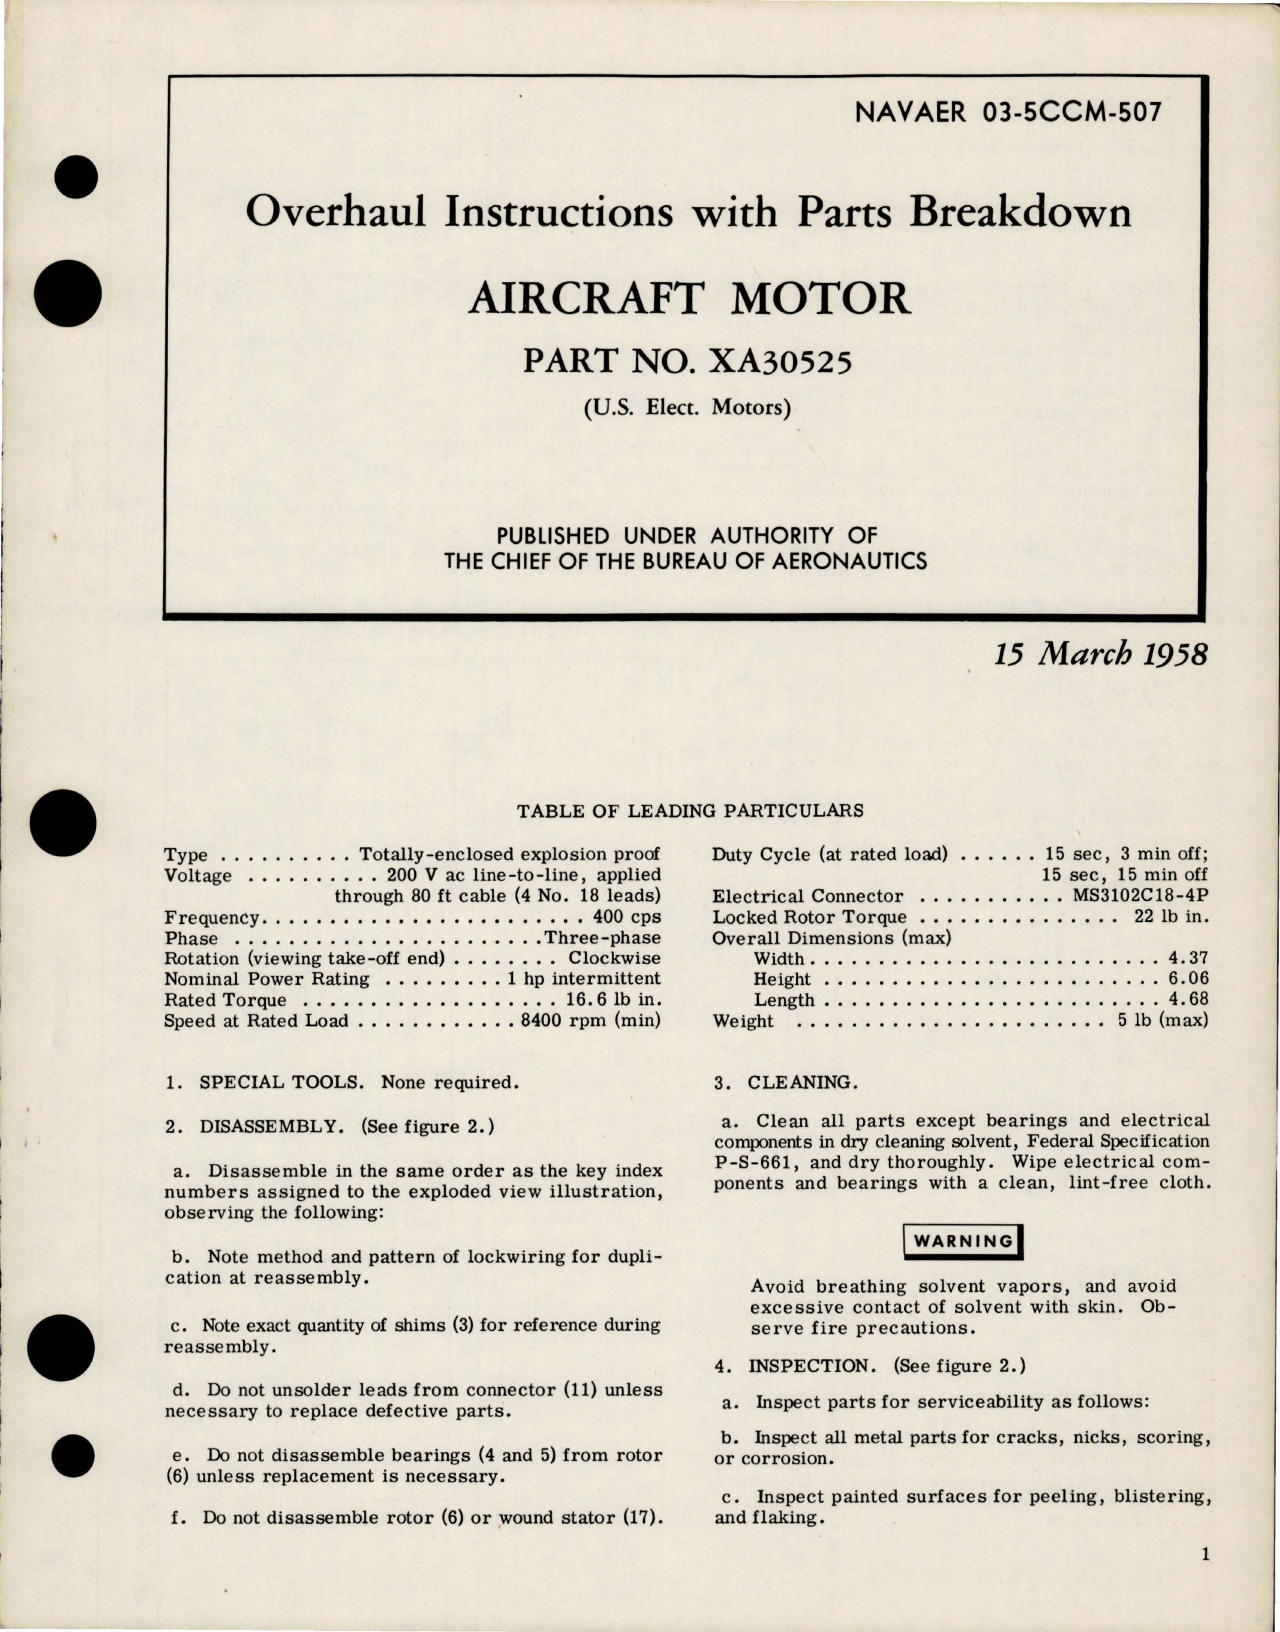 Sample page 1 from AirCorps Library document: Overhaul Instructions with Parts Breakdown for Aircraft Motors - Part XA30525 